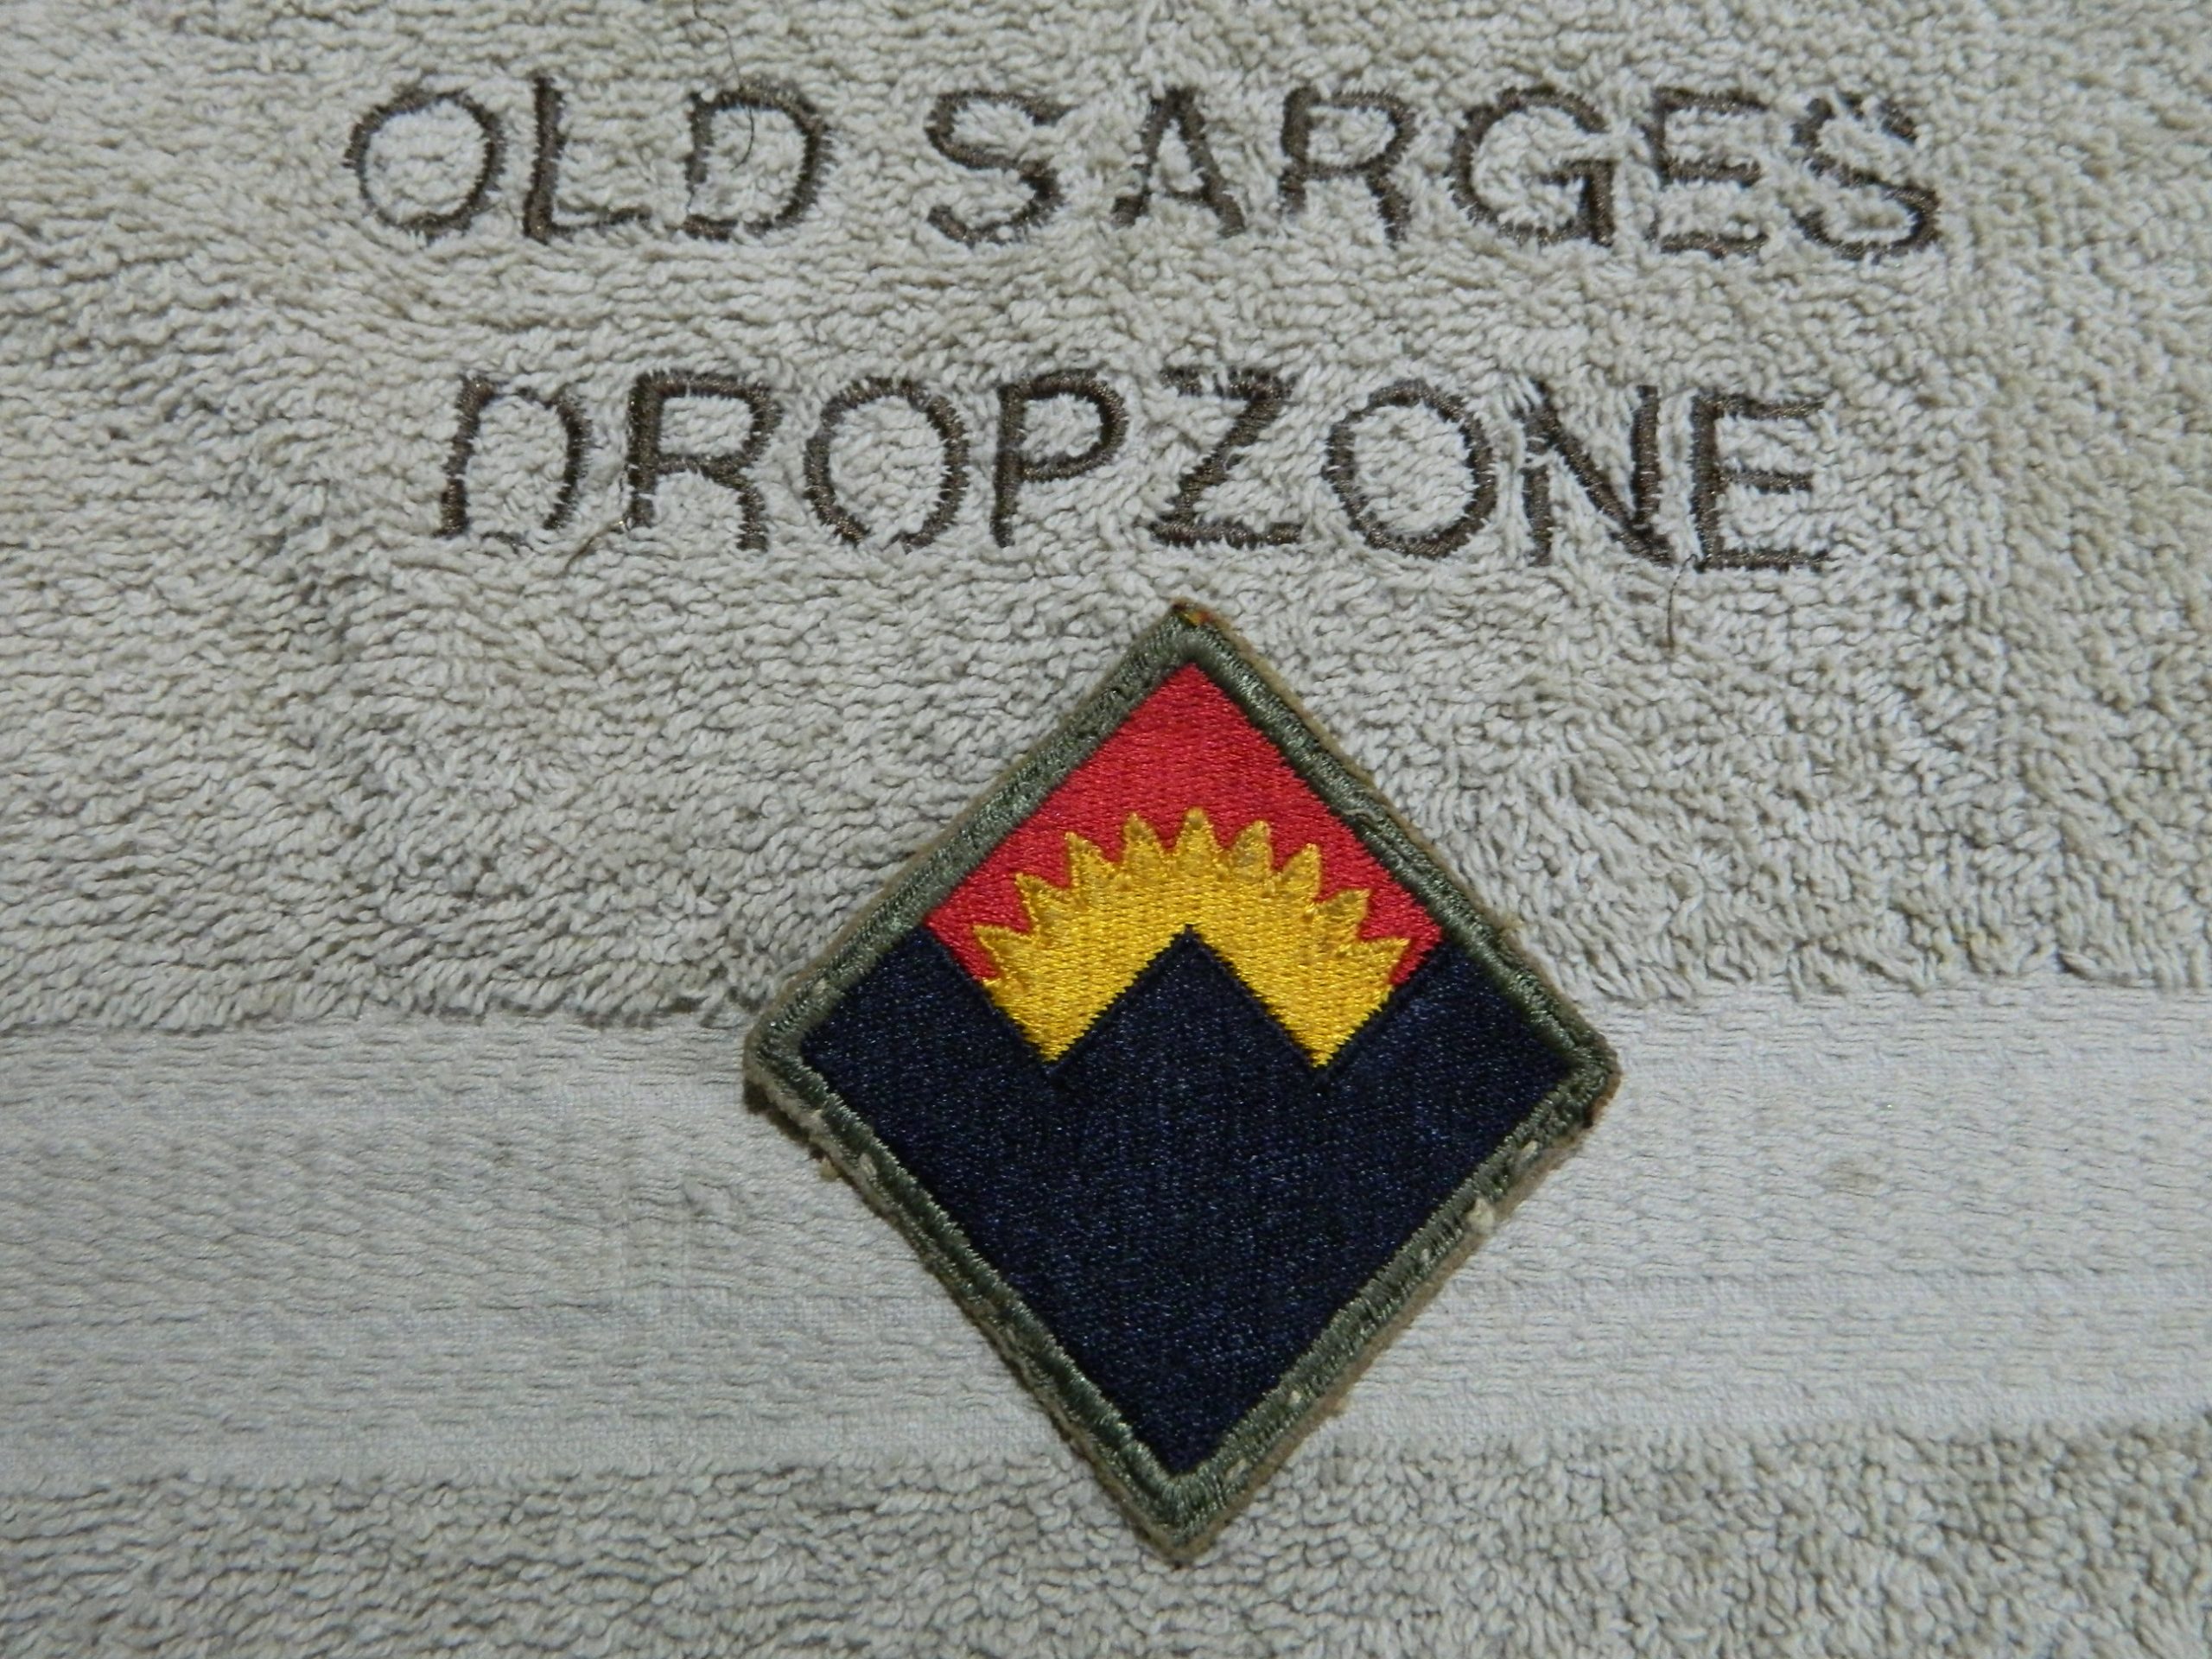 Defense Command Western Ww2 Color Old Sarges Drop Zone